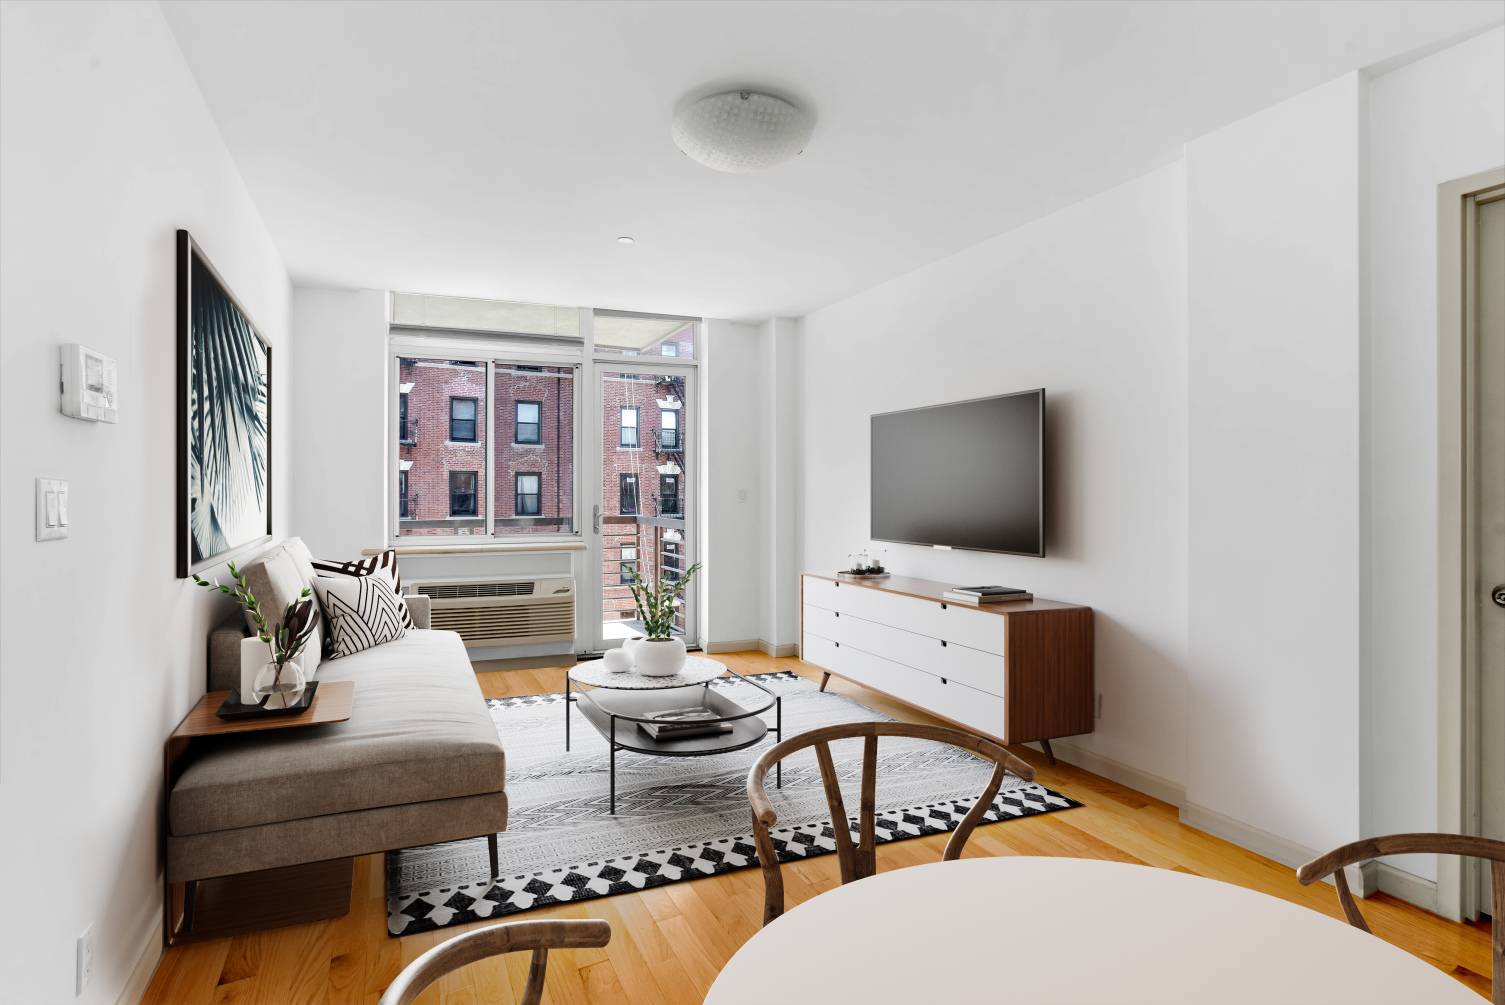 Enjoy endless western sunlight and great storage space in this expansive split two bedroom, two bathroom home in a modern East Harlem condominium building.